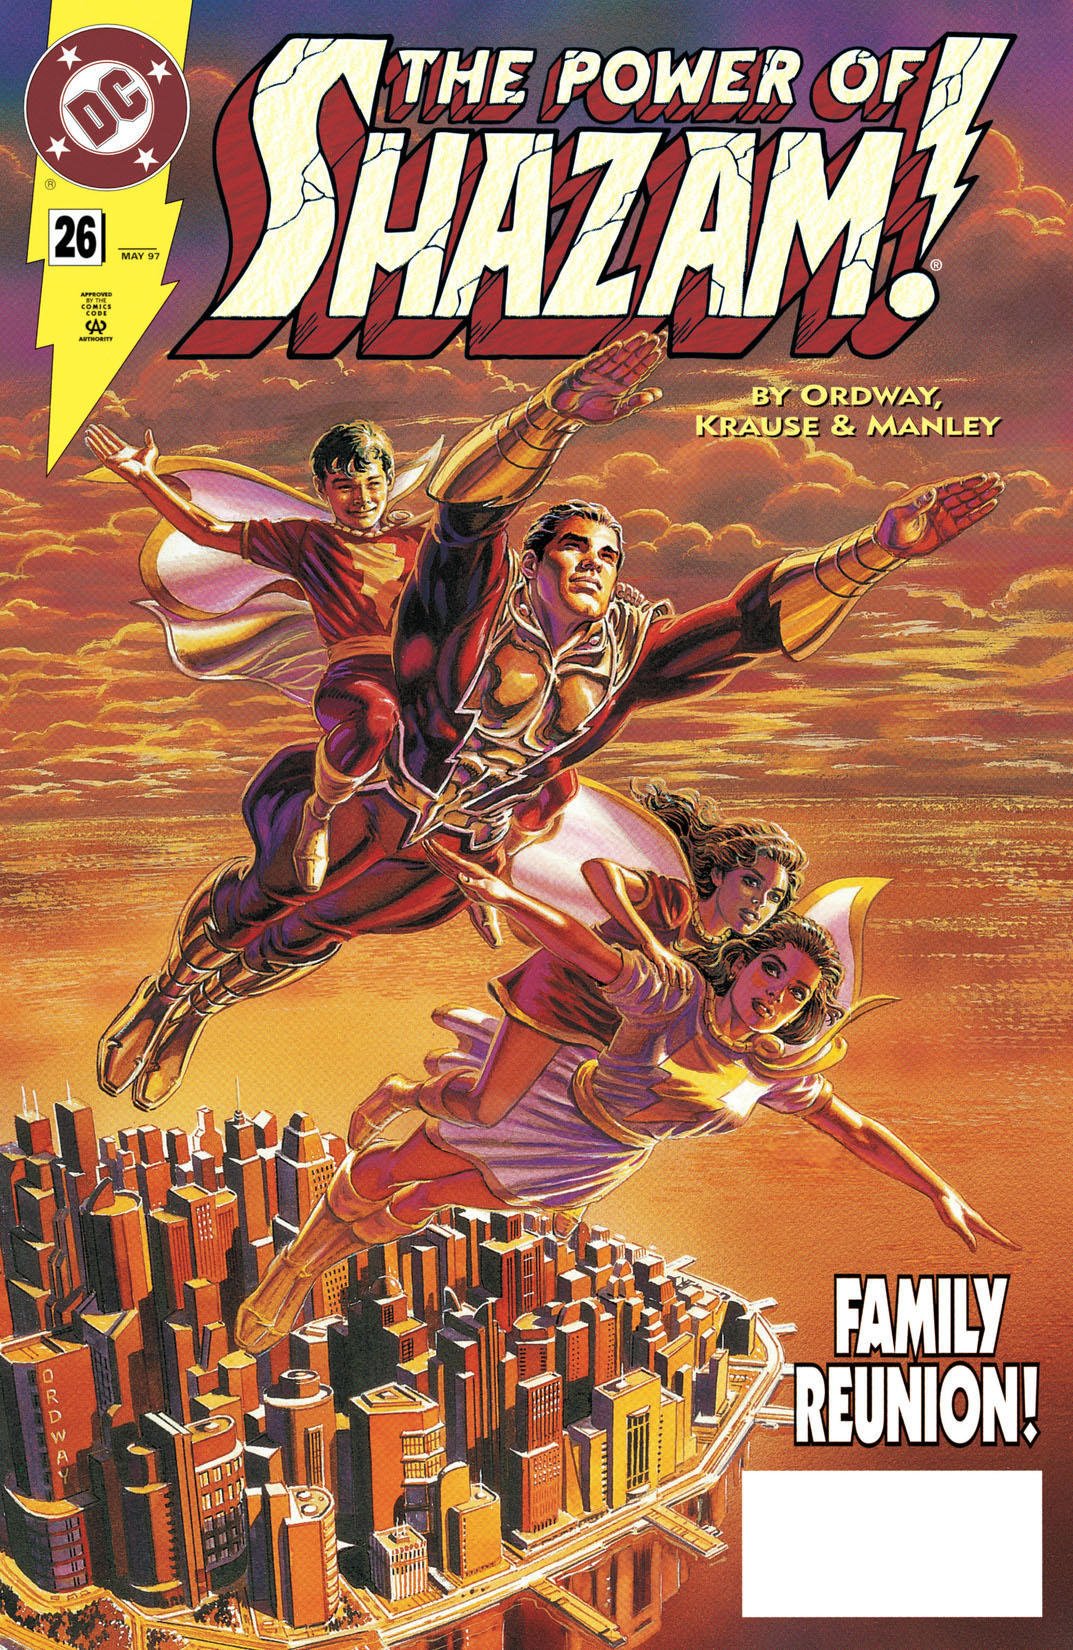 The Power of Shazam! #26 preview images